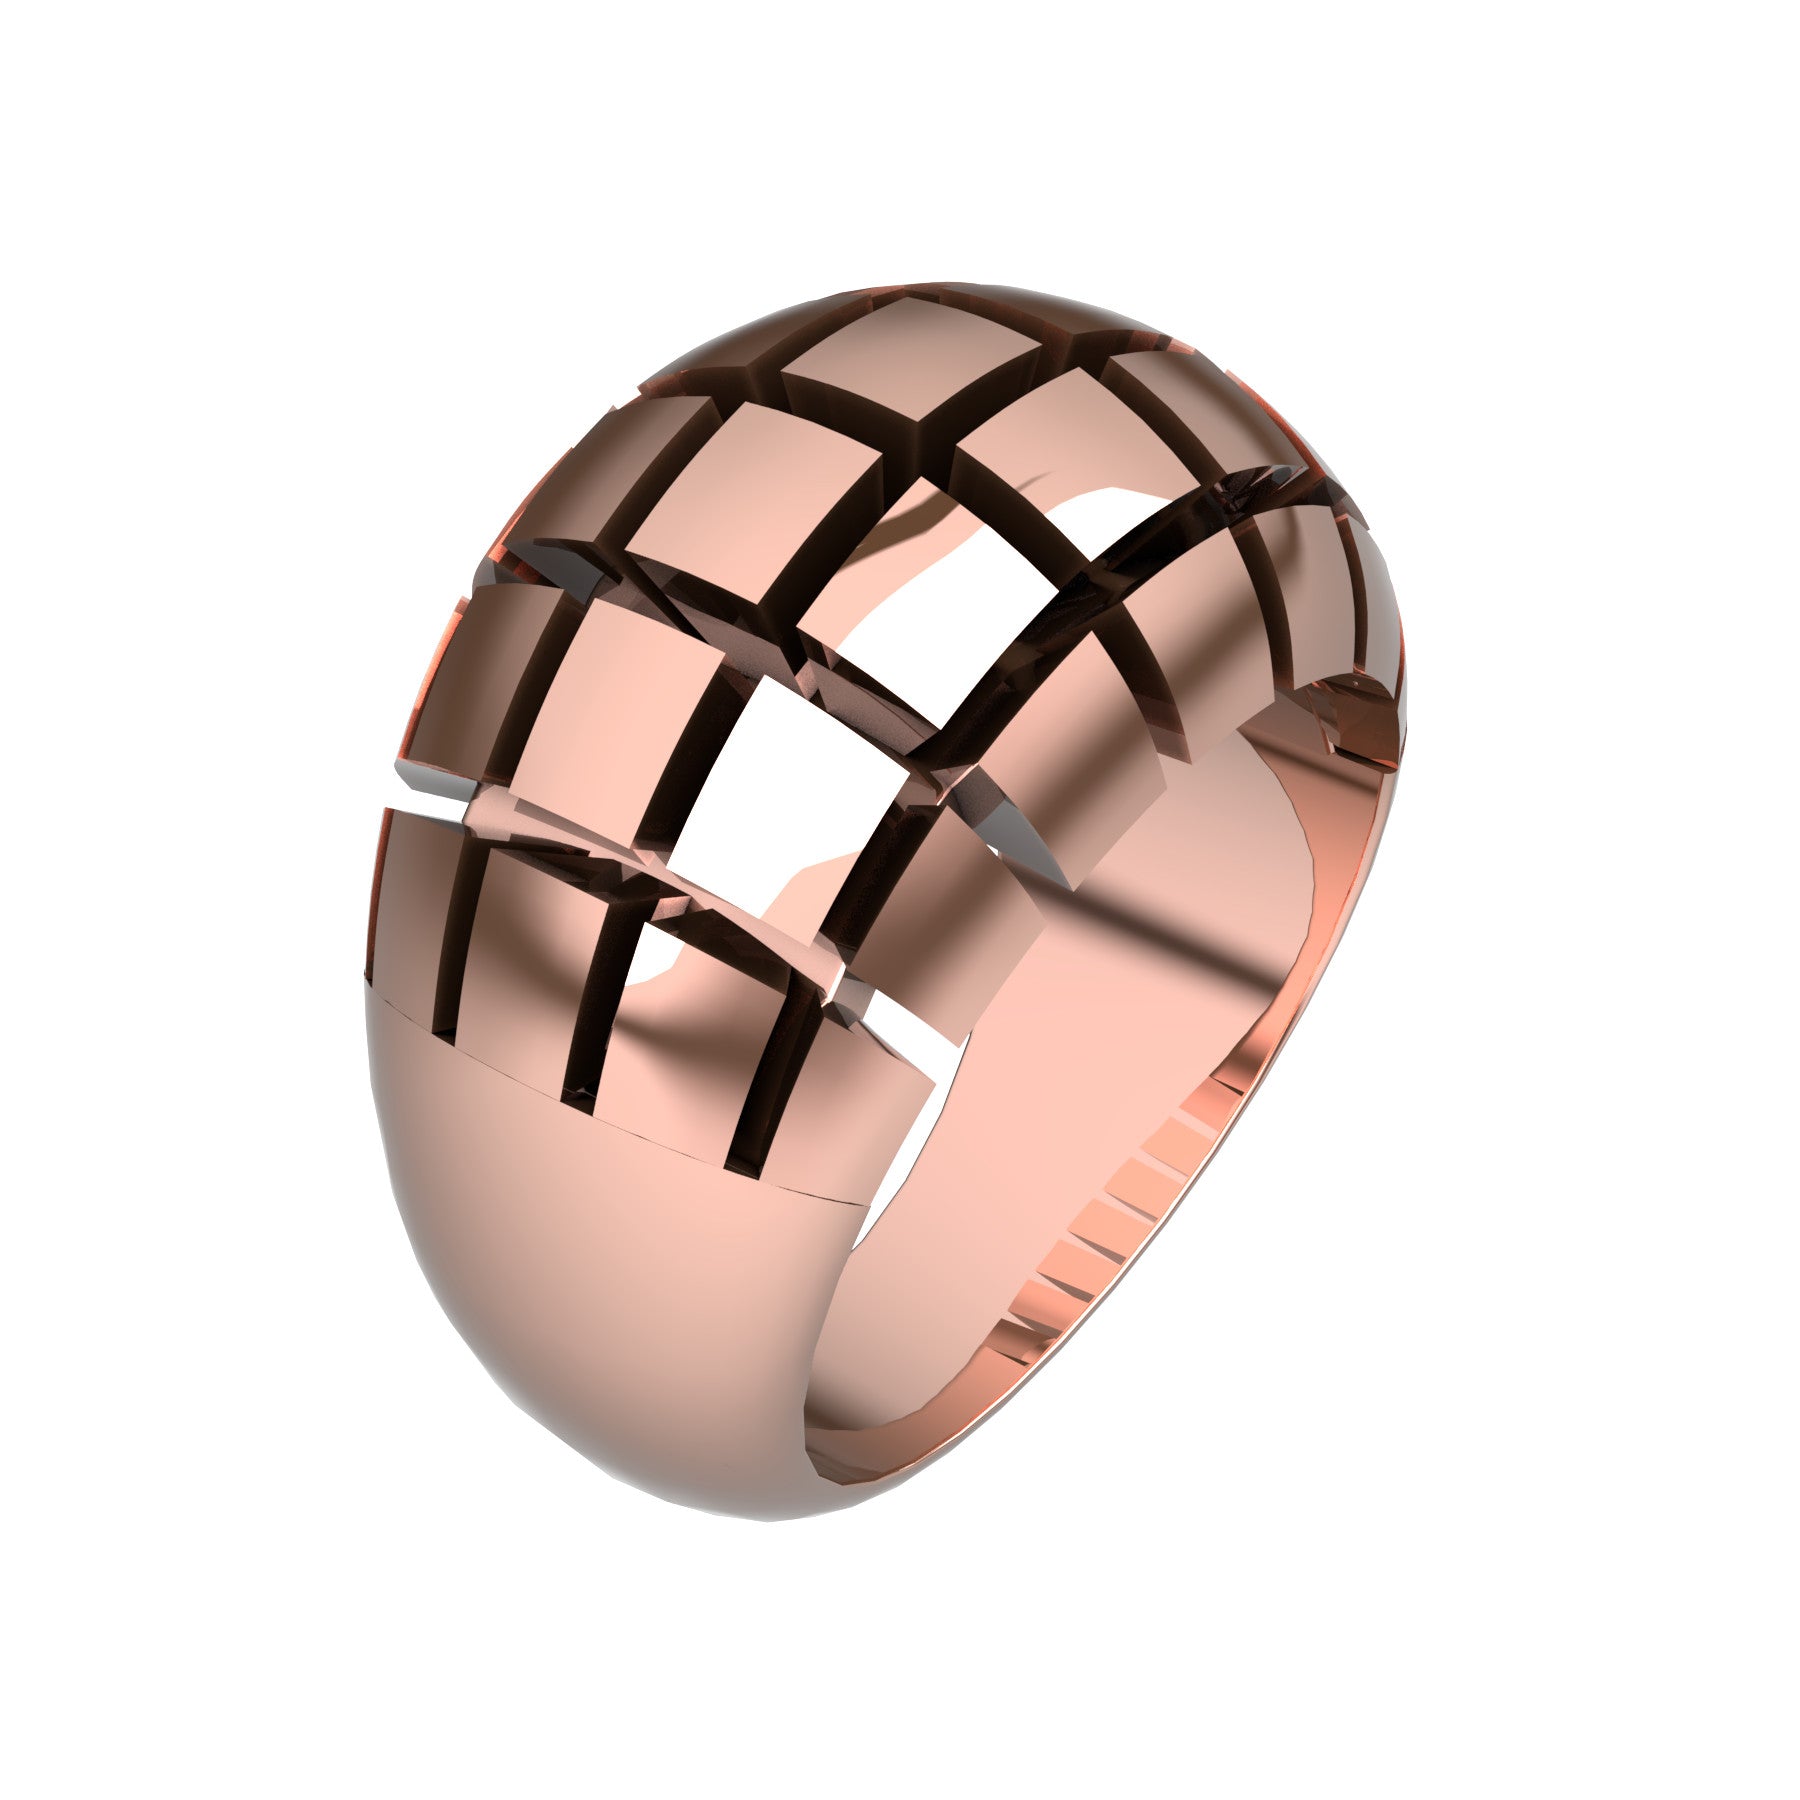 split 5 ring, 18 K pink gold, weight about 18,5 g. (0.65 oz), width 13,3 mm max